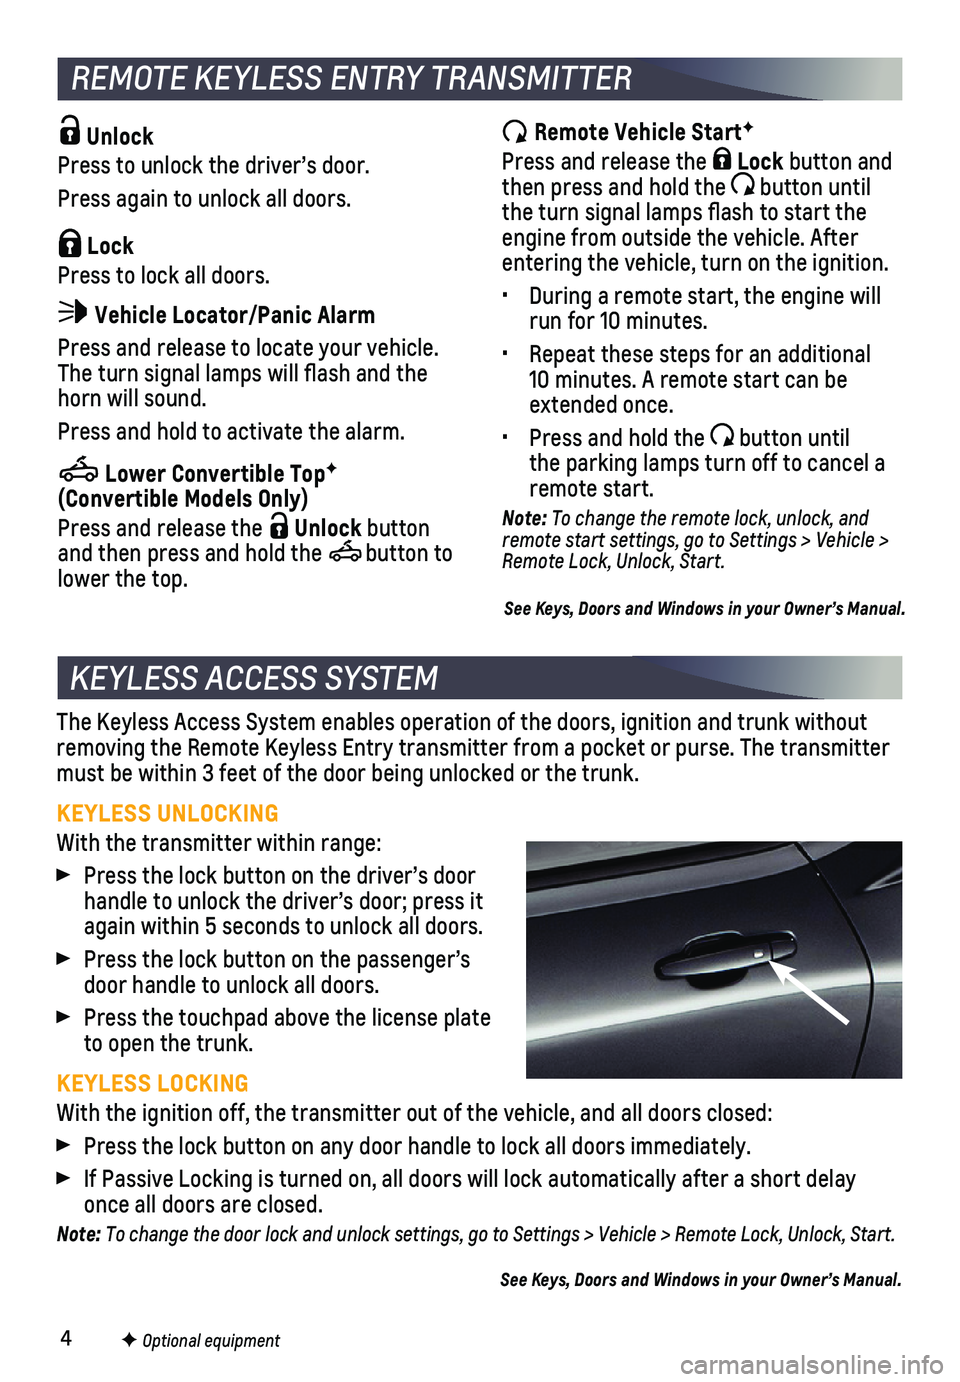 CHEVROLET CAMARO 2018  Get To Know Guide 4
The Keyless Access System enables operation of the doors, ignition and t\
runk without removing the Remote Keyless Entry transmitter from a pocket or purse. Th\
e transmitter must be within 3 feet o